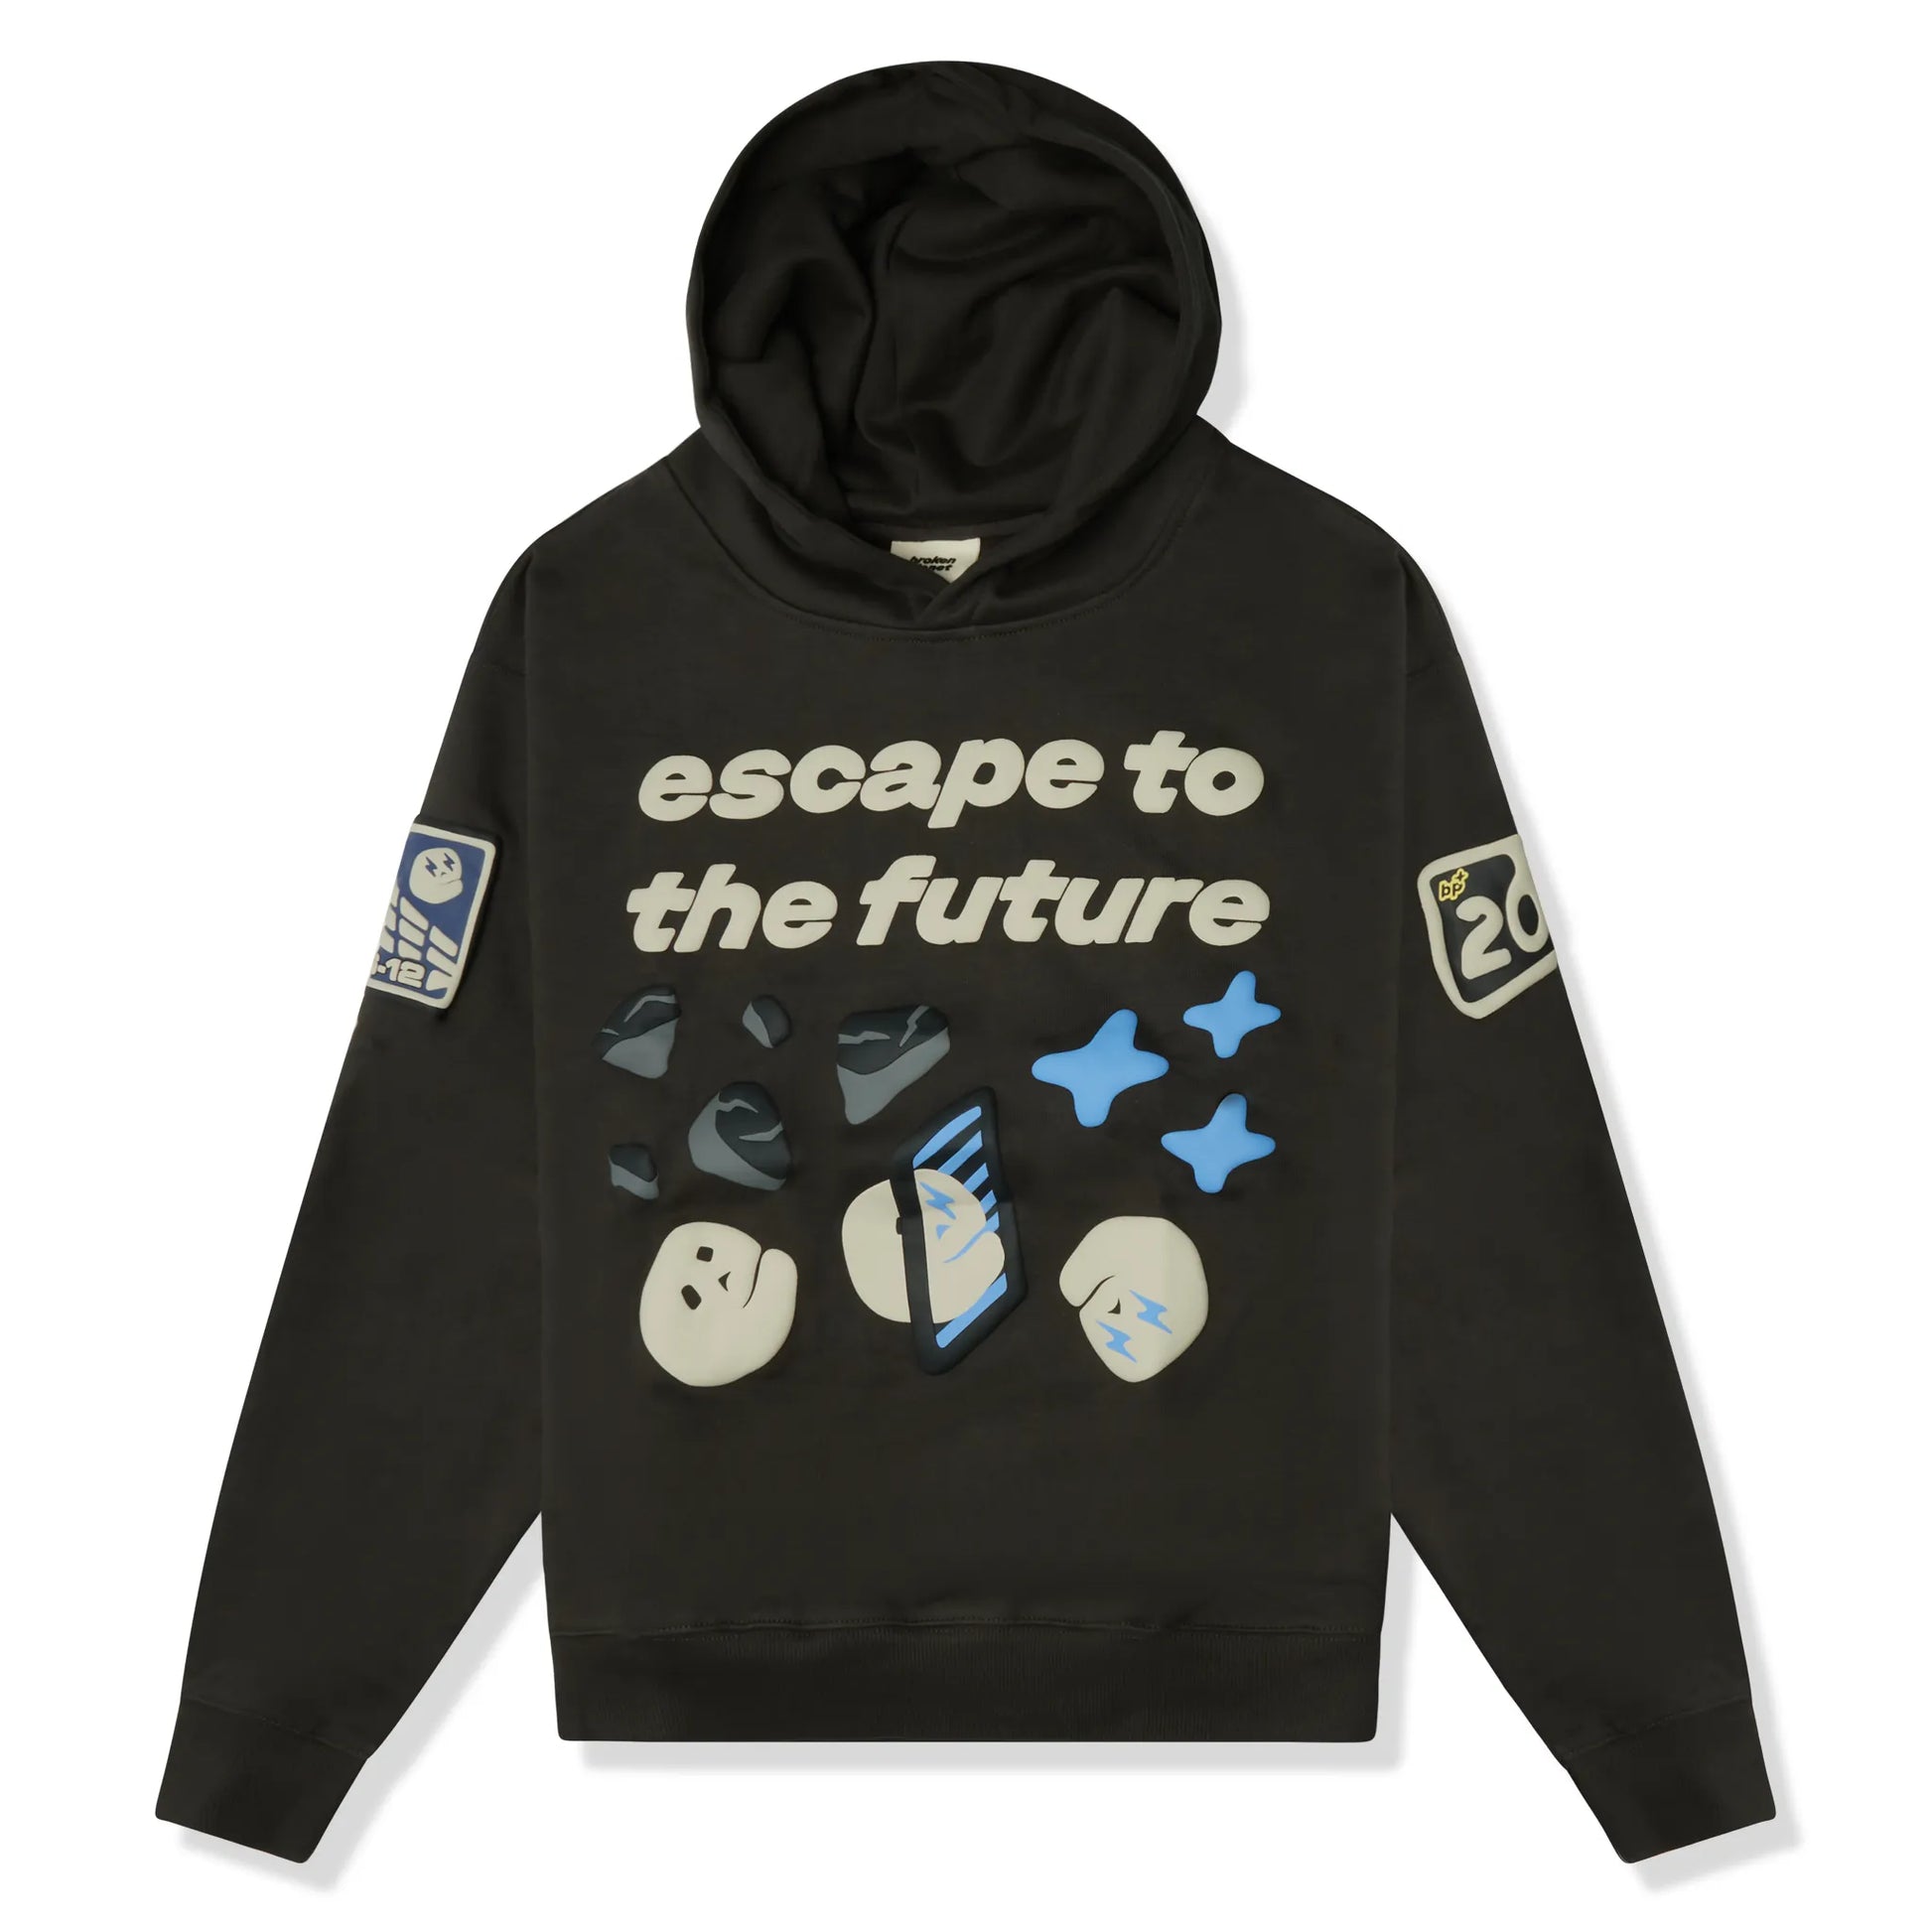 Broken Planet Escape To The Future Hoodie Soot Black -Broken Planet Escape To The Future Hoodie Soot Black